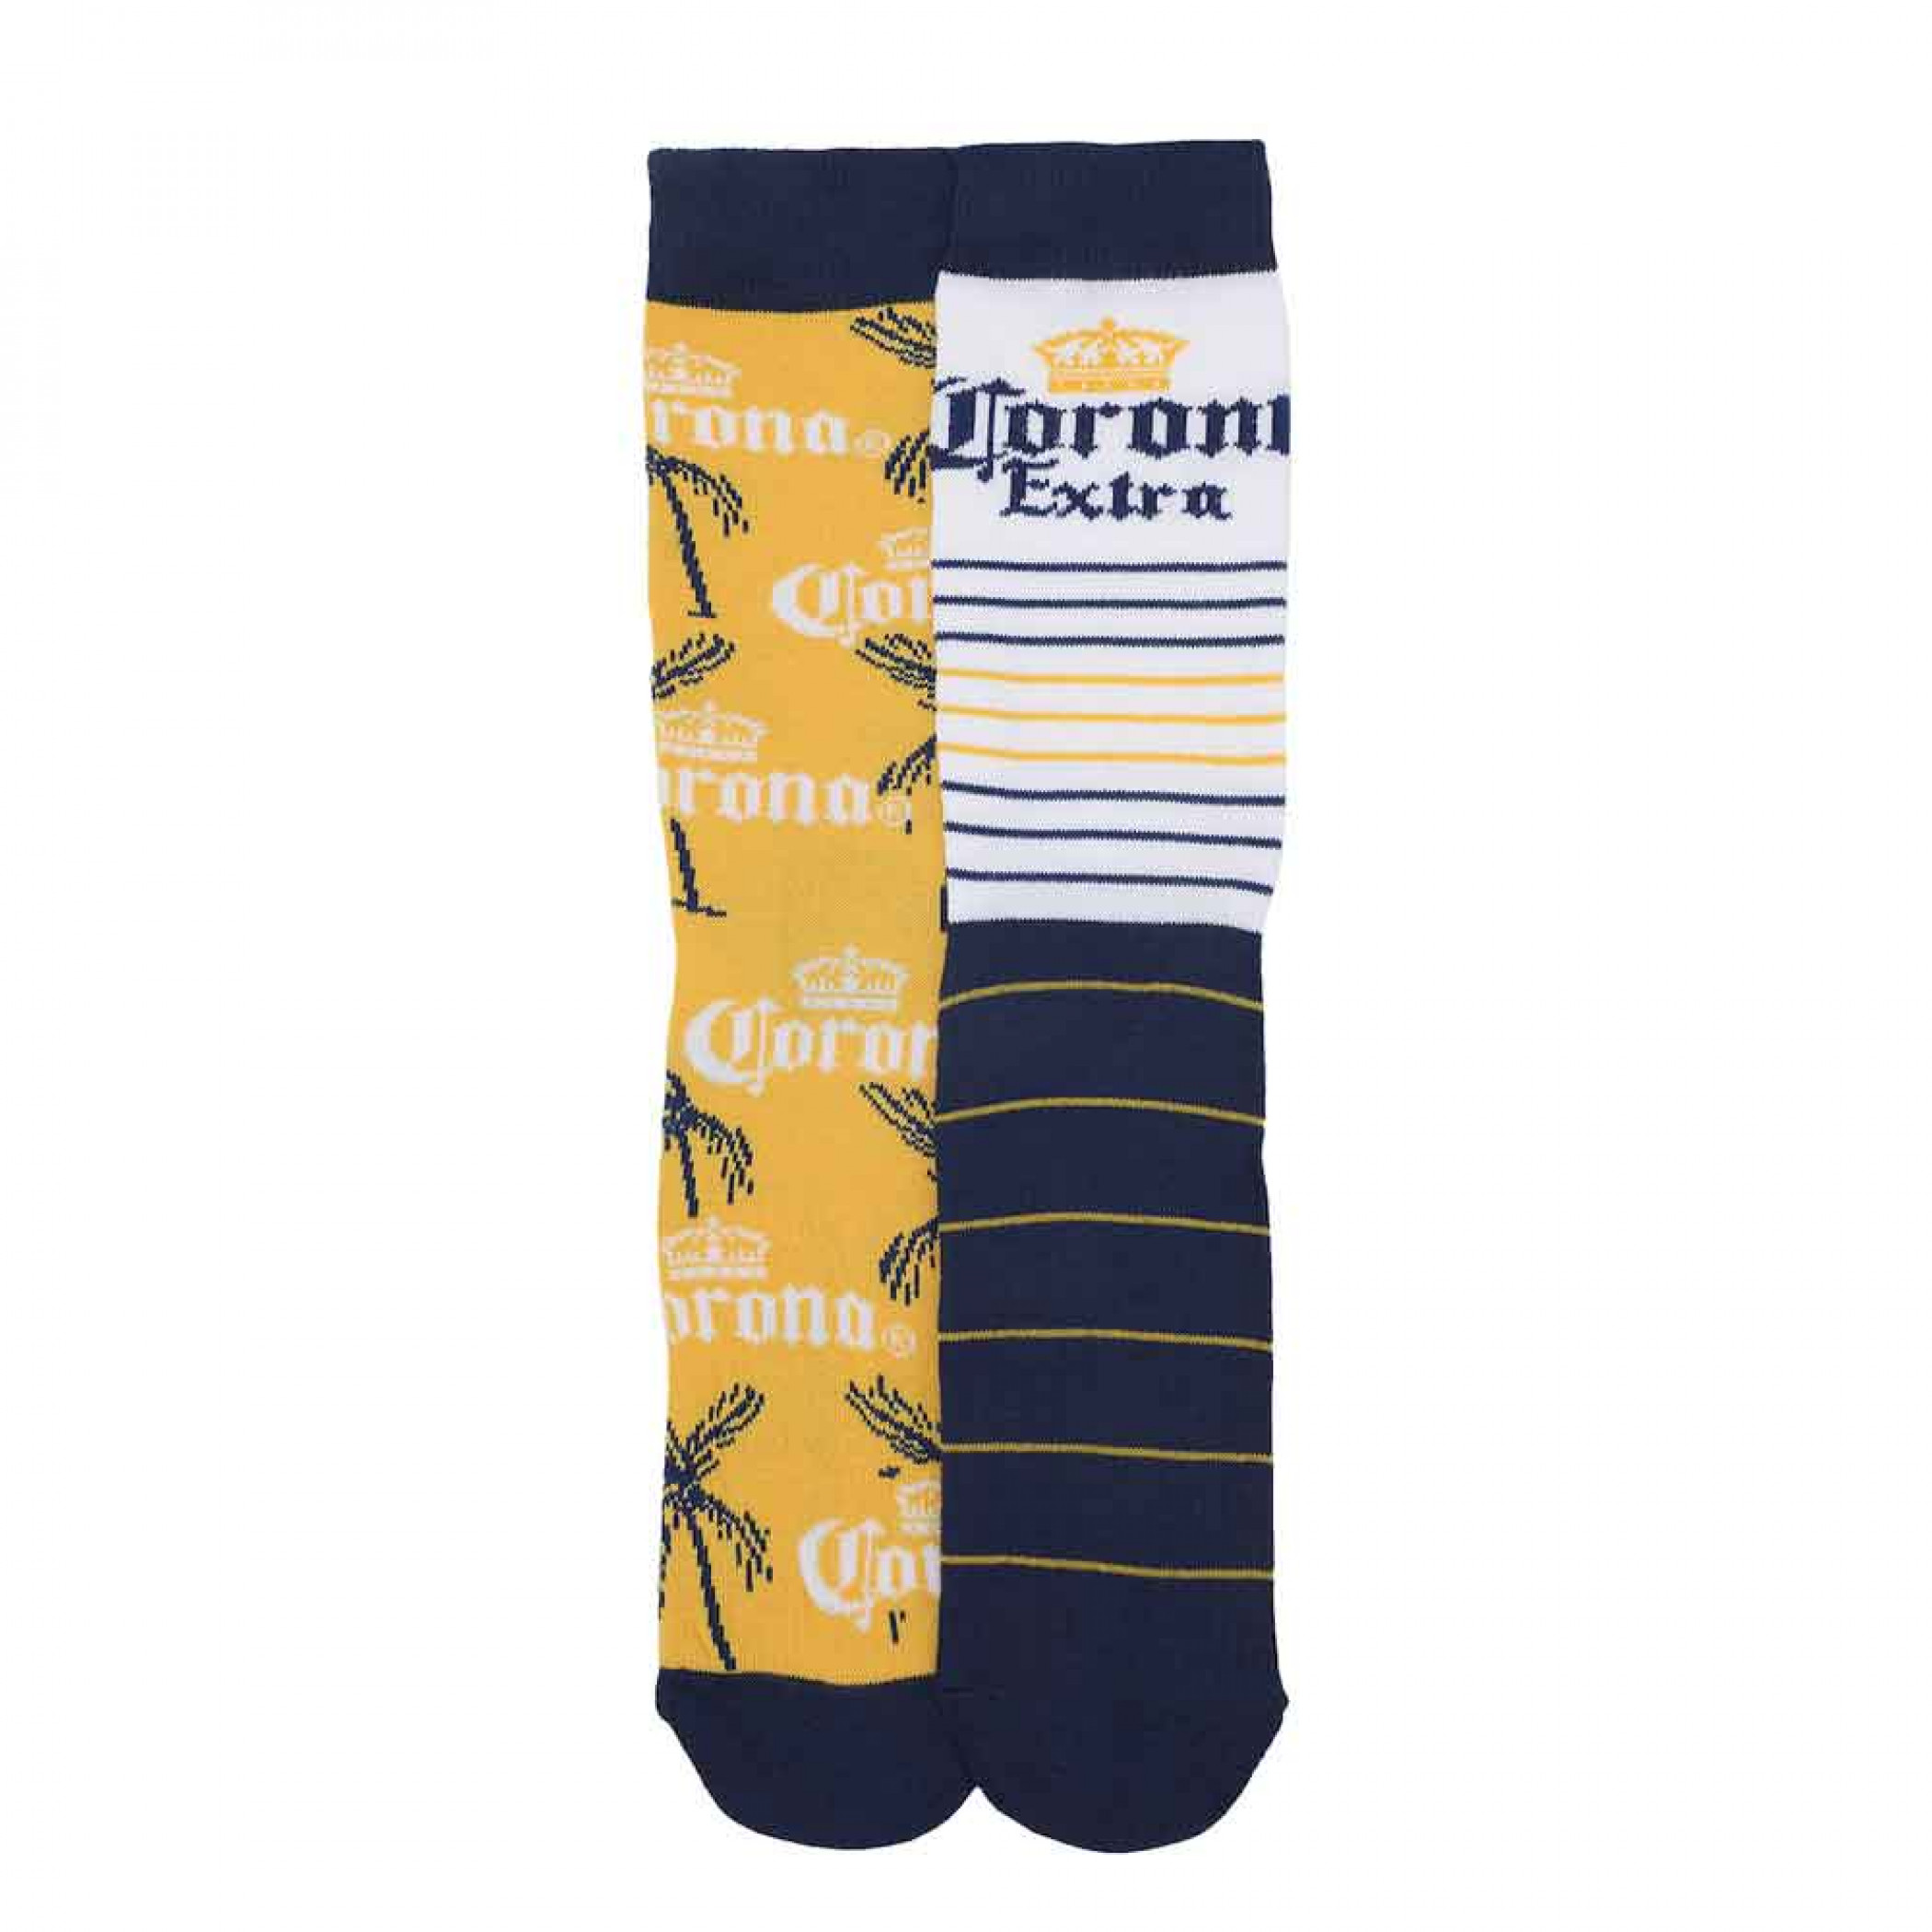 Corona Extra 2-Pairs of Crew Socks in Beer Can Set